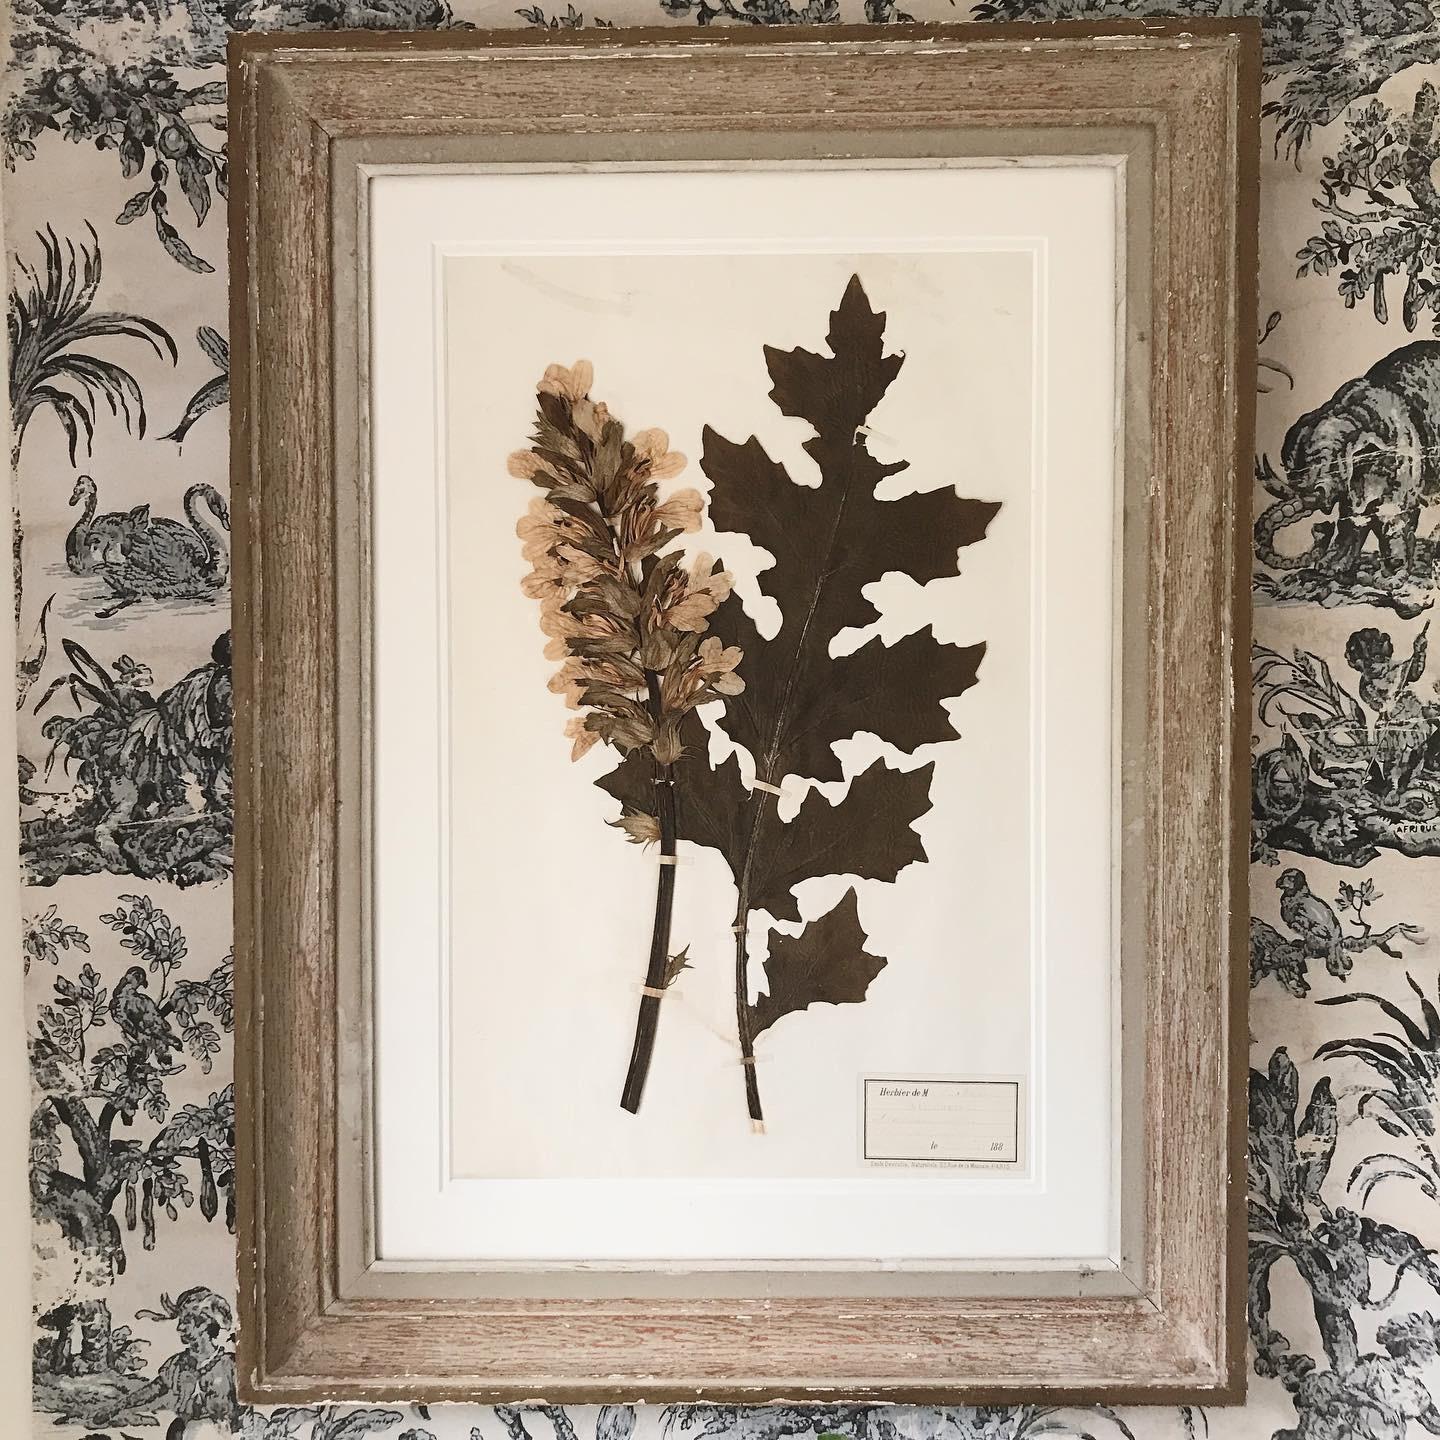 A large framed late 19th century herbarium - a lovely strong example dated 1882 in an antique French painted frame
Expertly double mounted and framed using non reflective glass 
A larger than average example